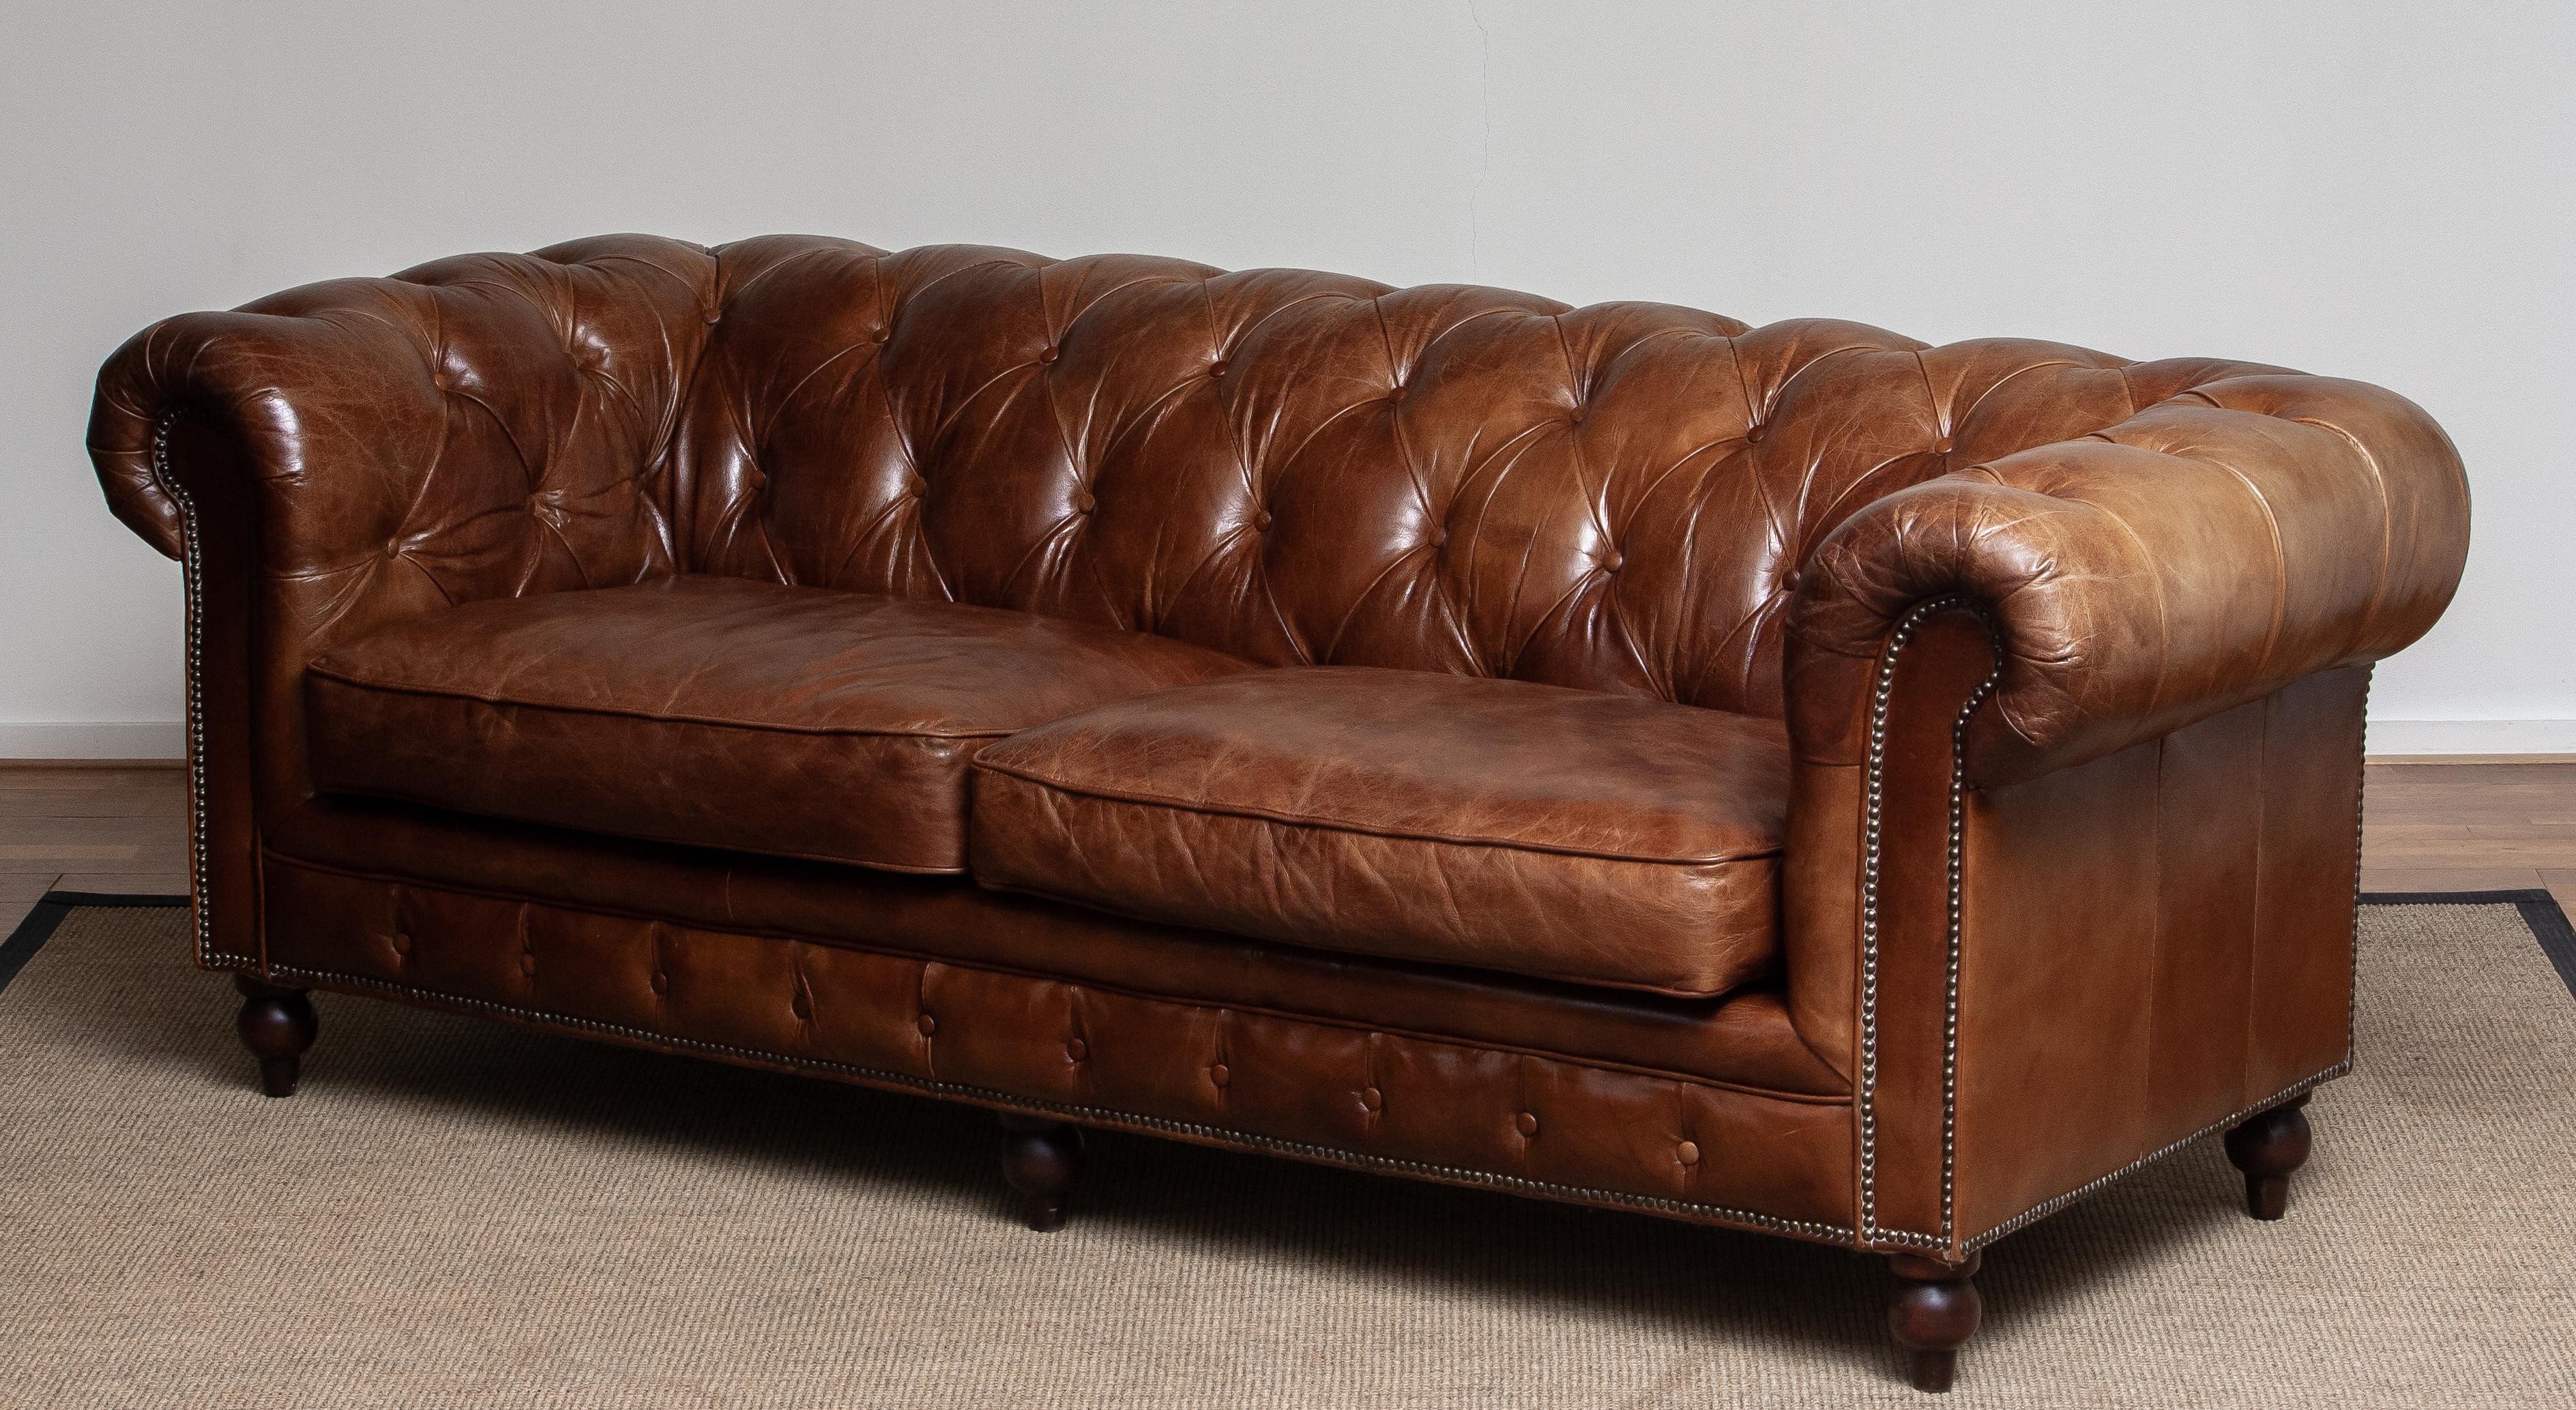 Tufted Brown Leather English Chesterfield Sofa from the 20th Century 5